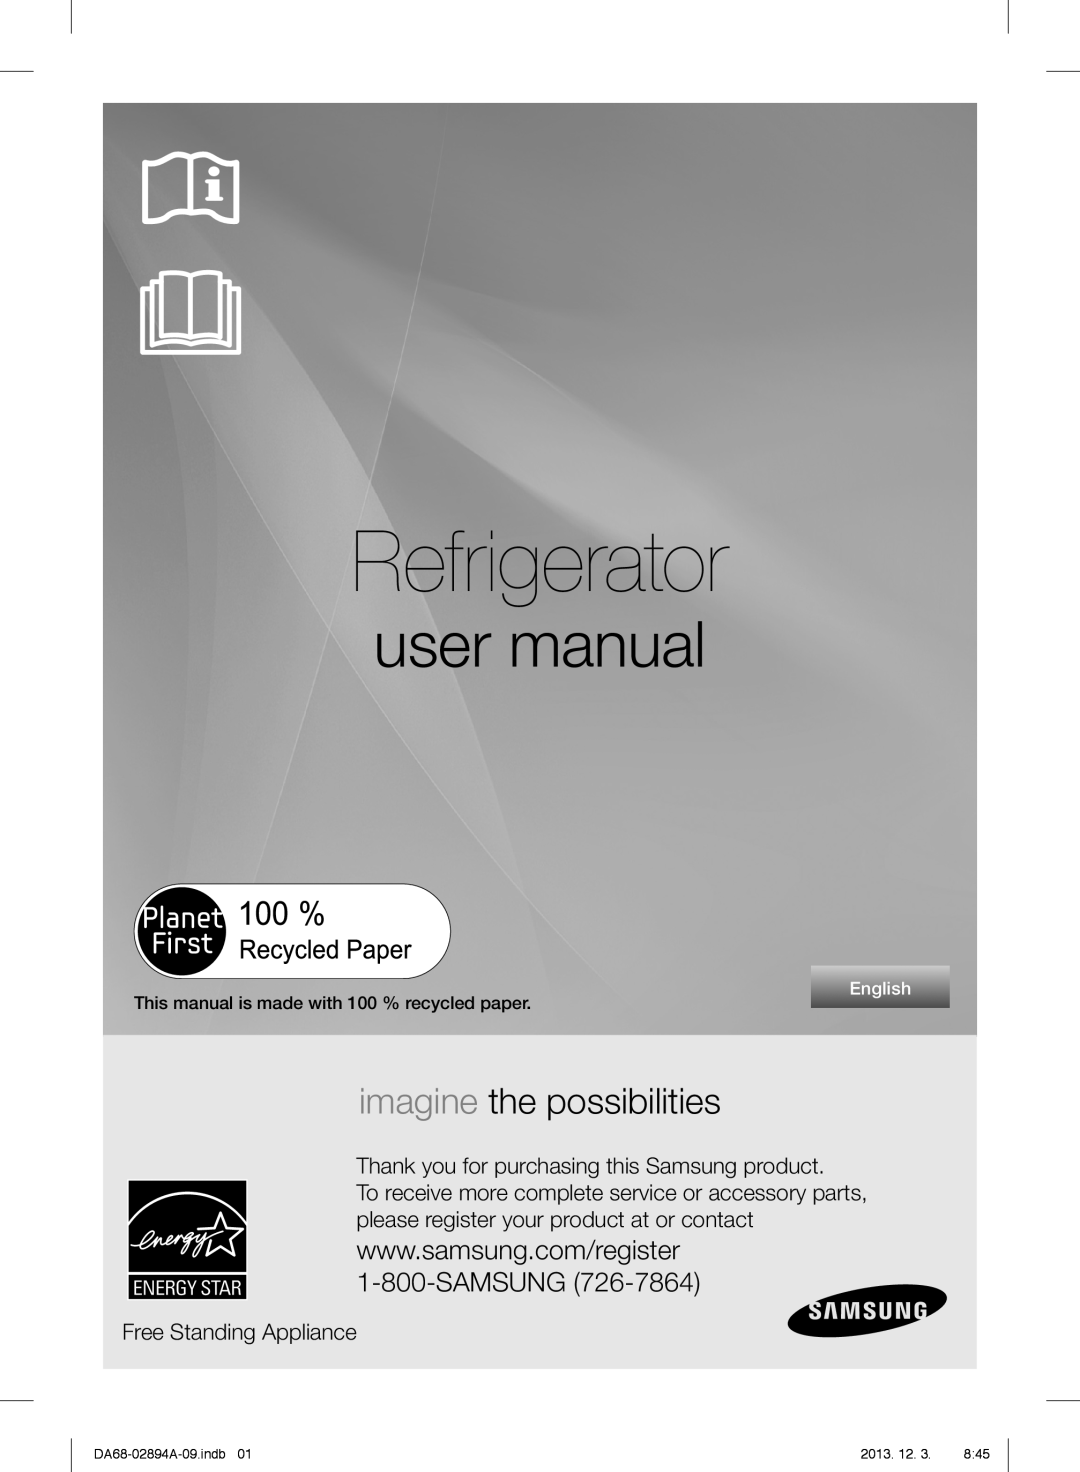 Samsung RF31FMESBSR user manual Refrigerator, imagine the possibilities, Thank you for purchasing this Samsung product 